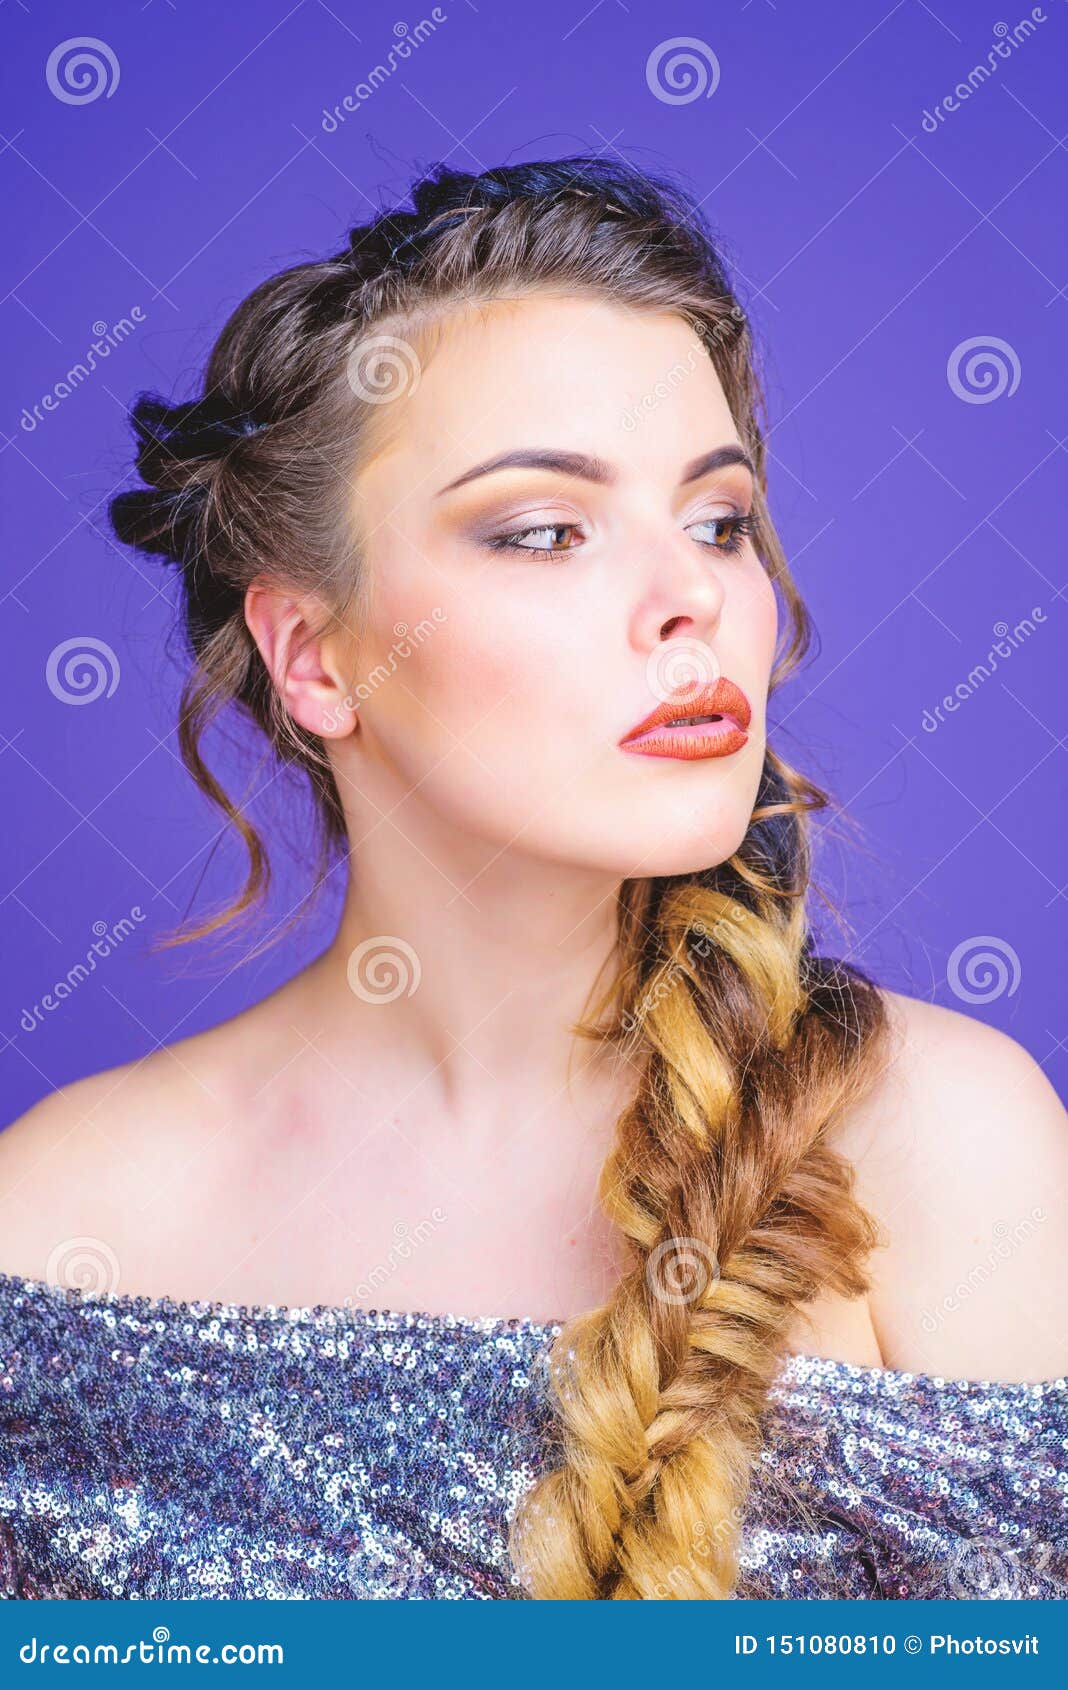 Braided Hairstyle. Girl Makeup Face Braided Long Hair. French Braid Stock  Photo - Image of hairstyle, care: 151080810